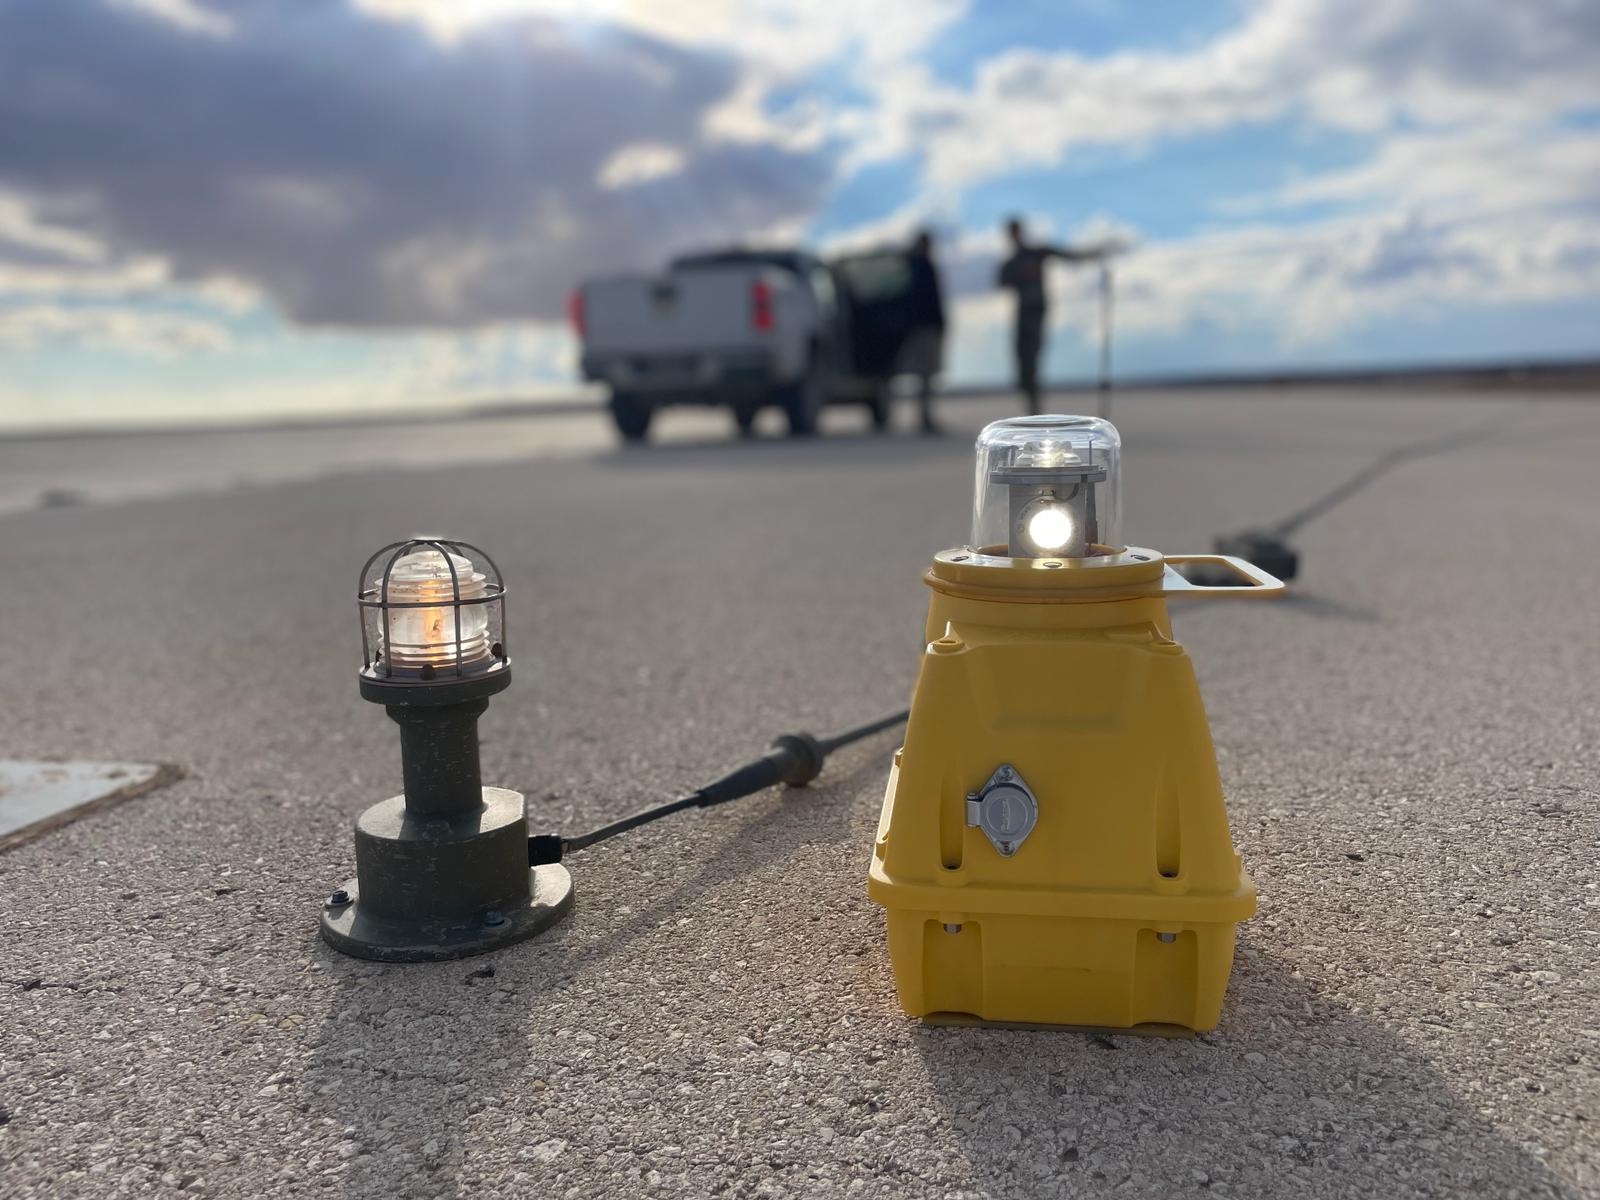 EALS Portable Runway Light (on the left) and S4GA SP-401 Portable Airfield Light